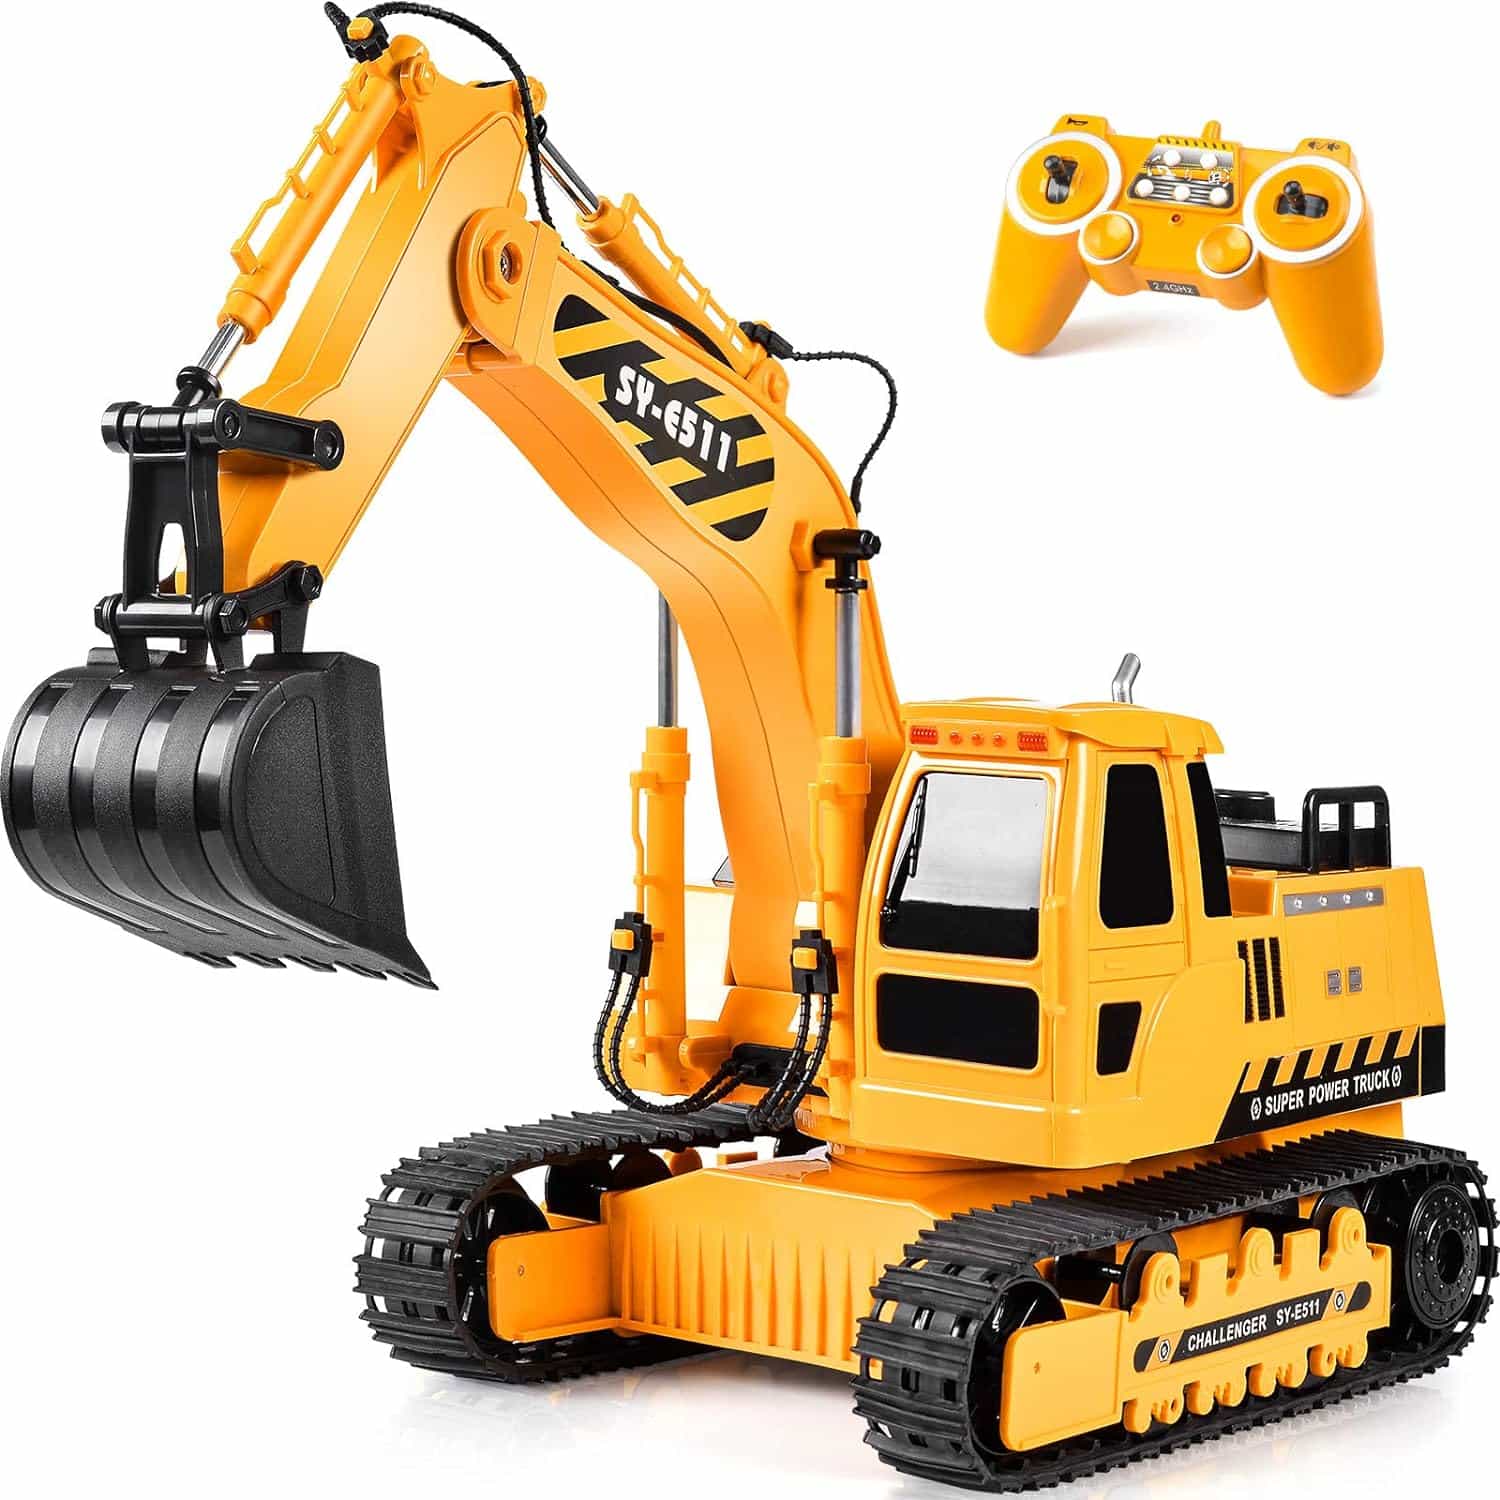 DOUBLE E Excavator Toys for Boys 11 Channel 1:20 Remote Control Excavator Construction Toys Tractor - A Realistic and Fun Review